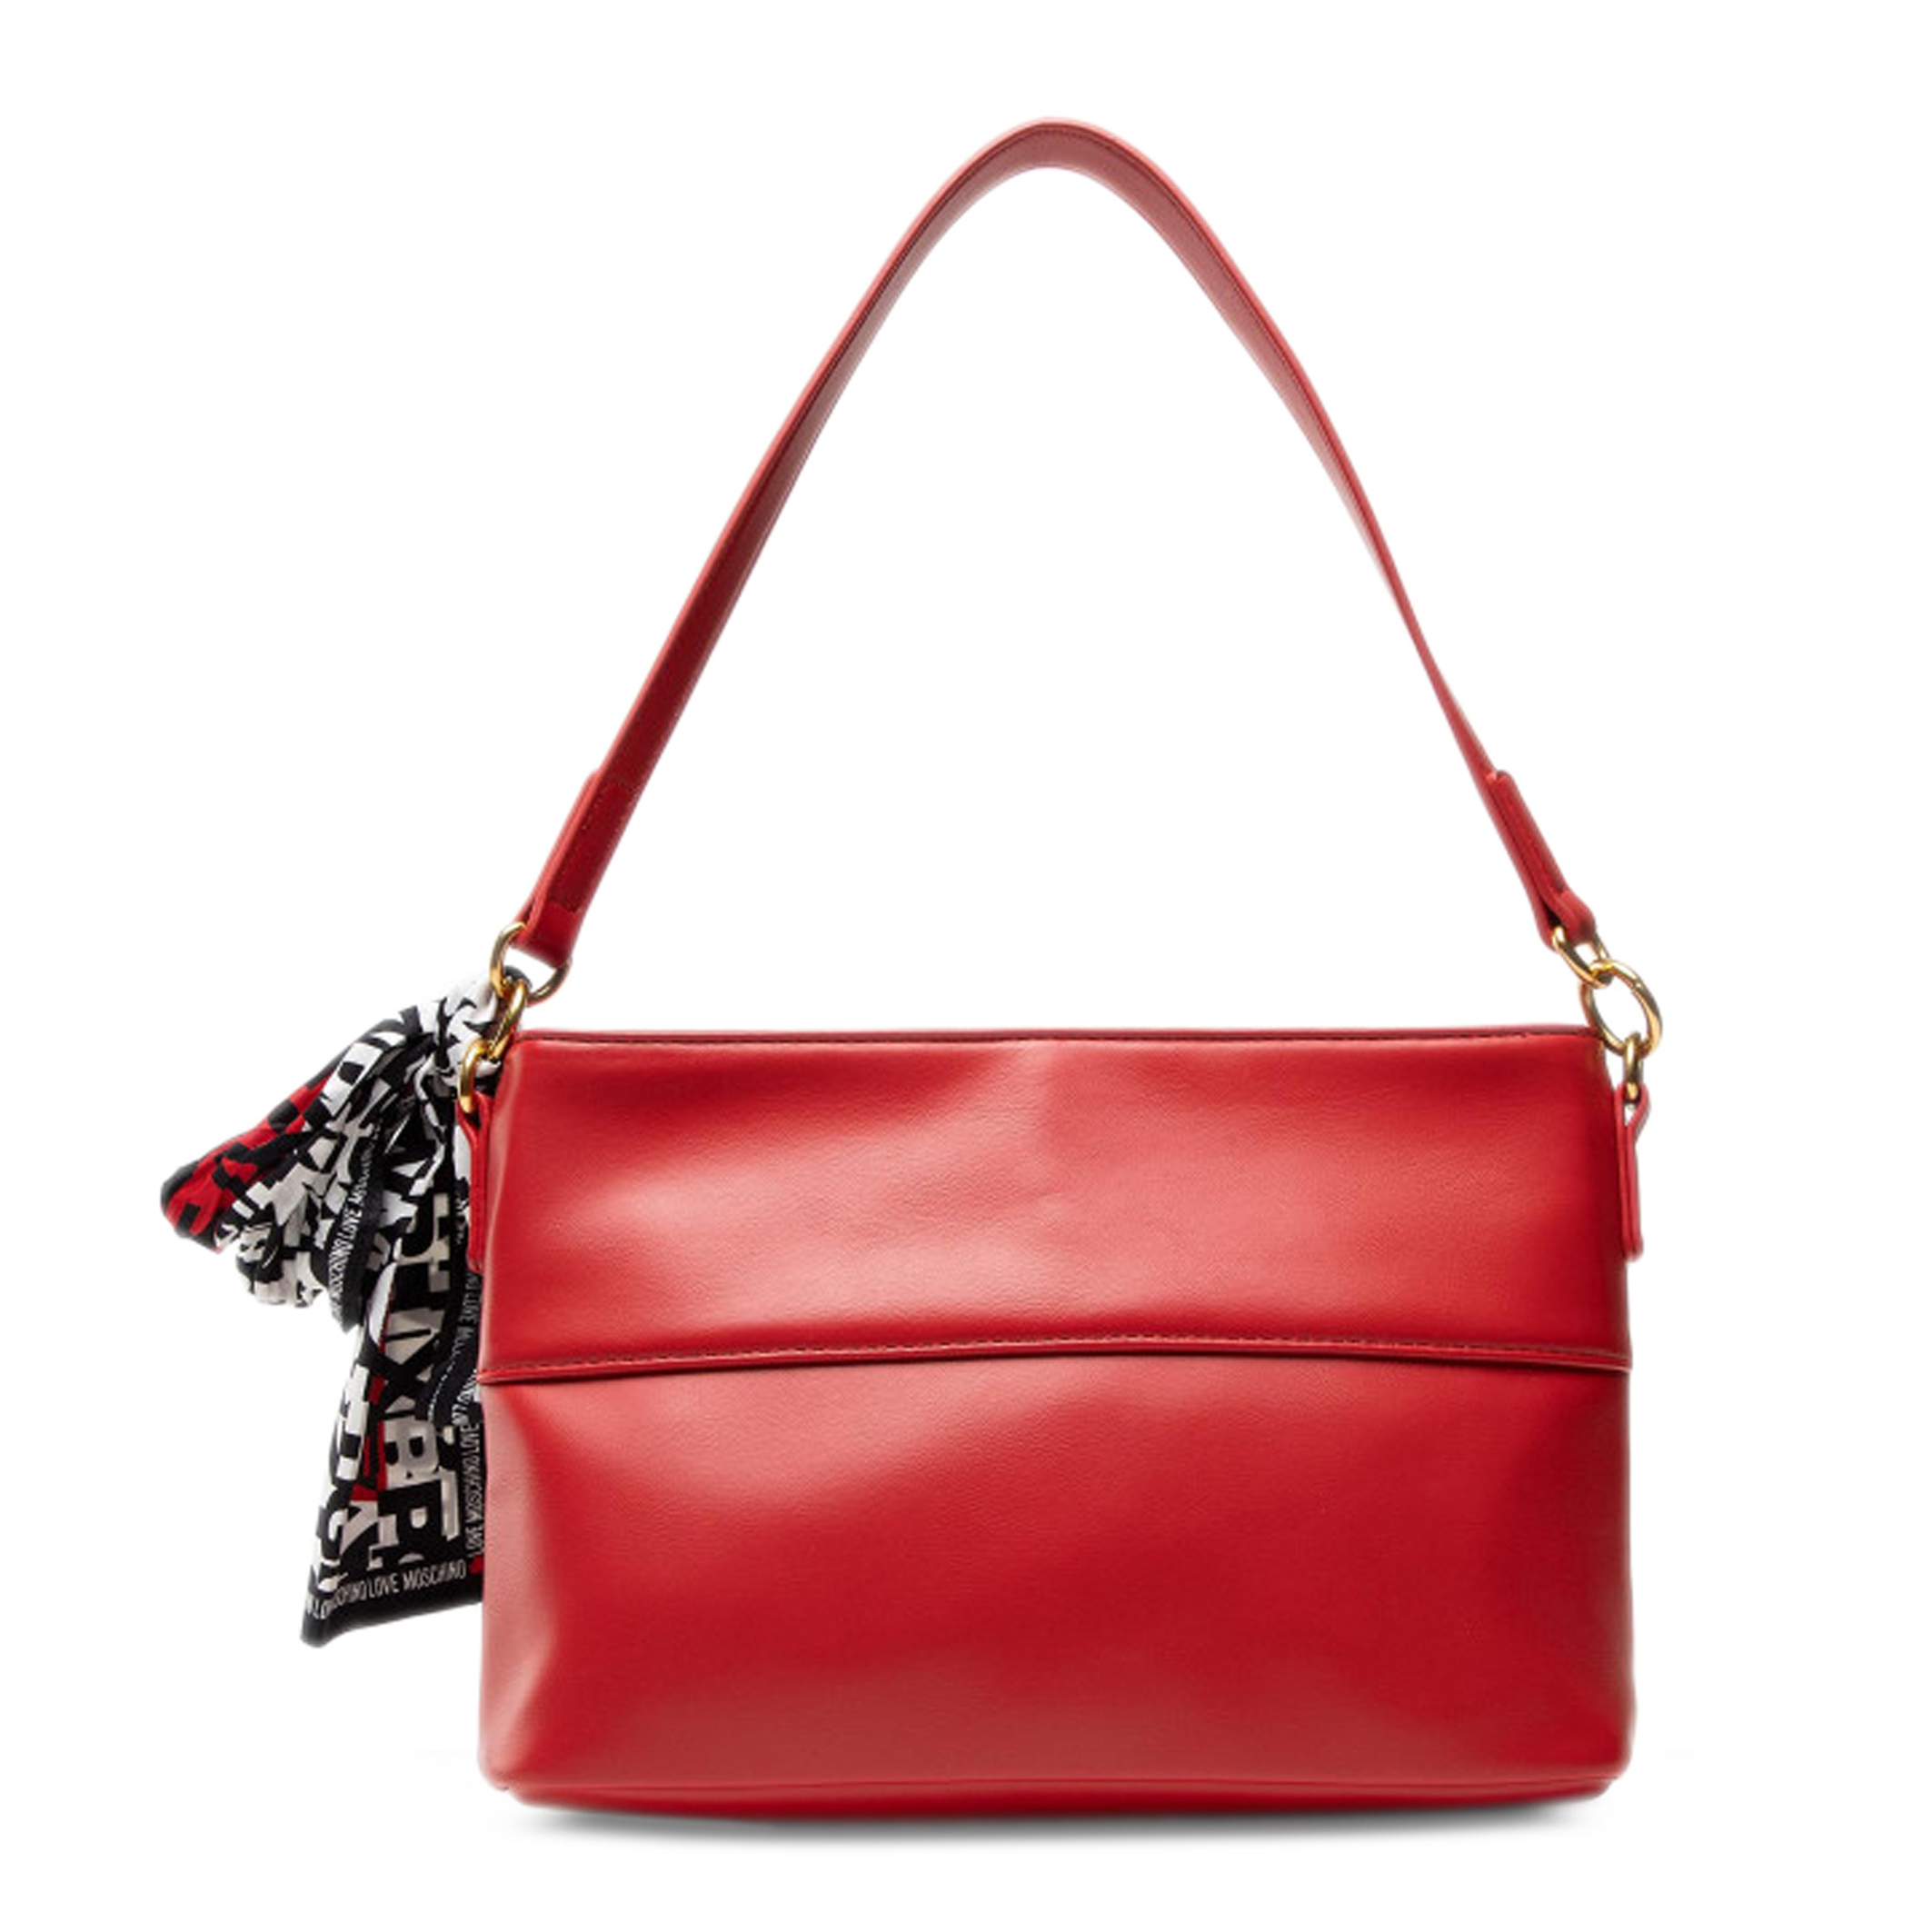 Love Moschino Red Shoulder bags for Women - JC4046PP1ELO0